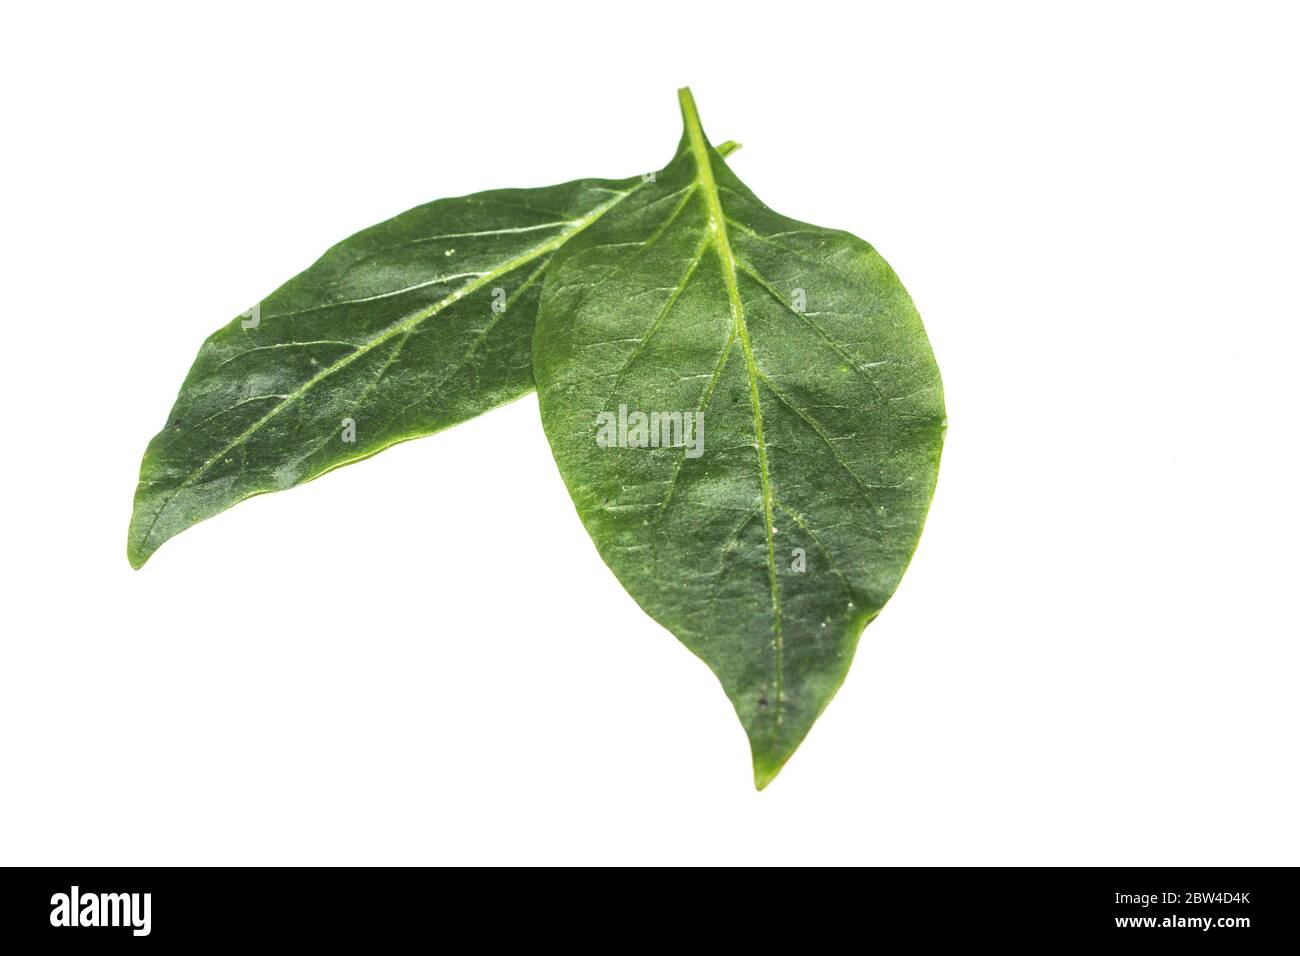 A picture of chili plant leafs Stock Photo